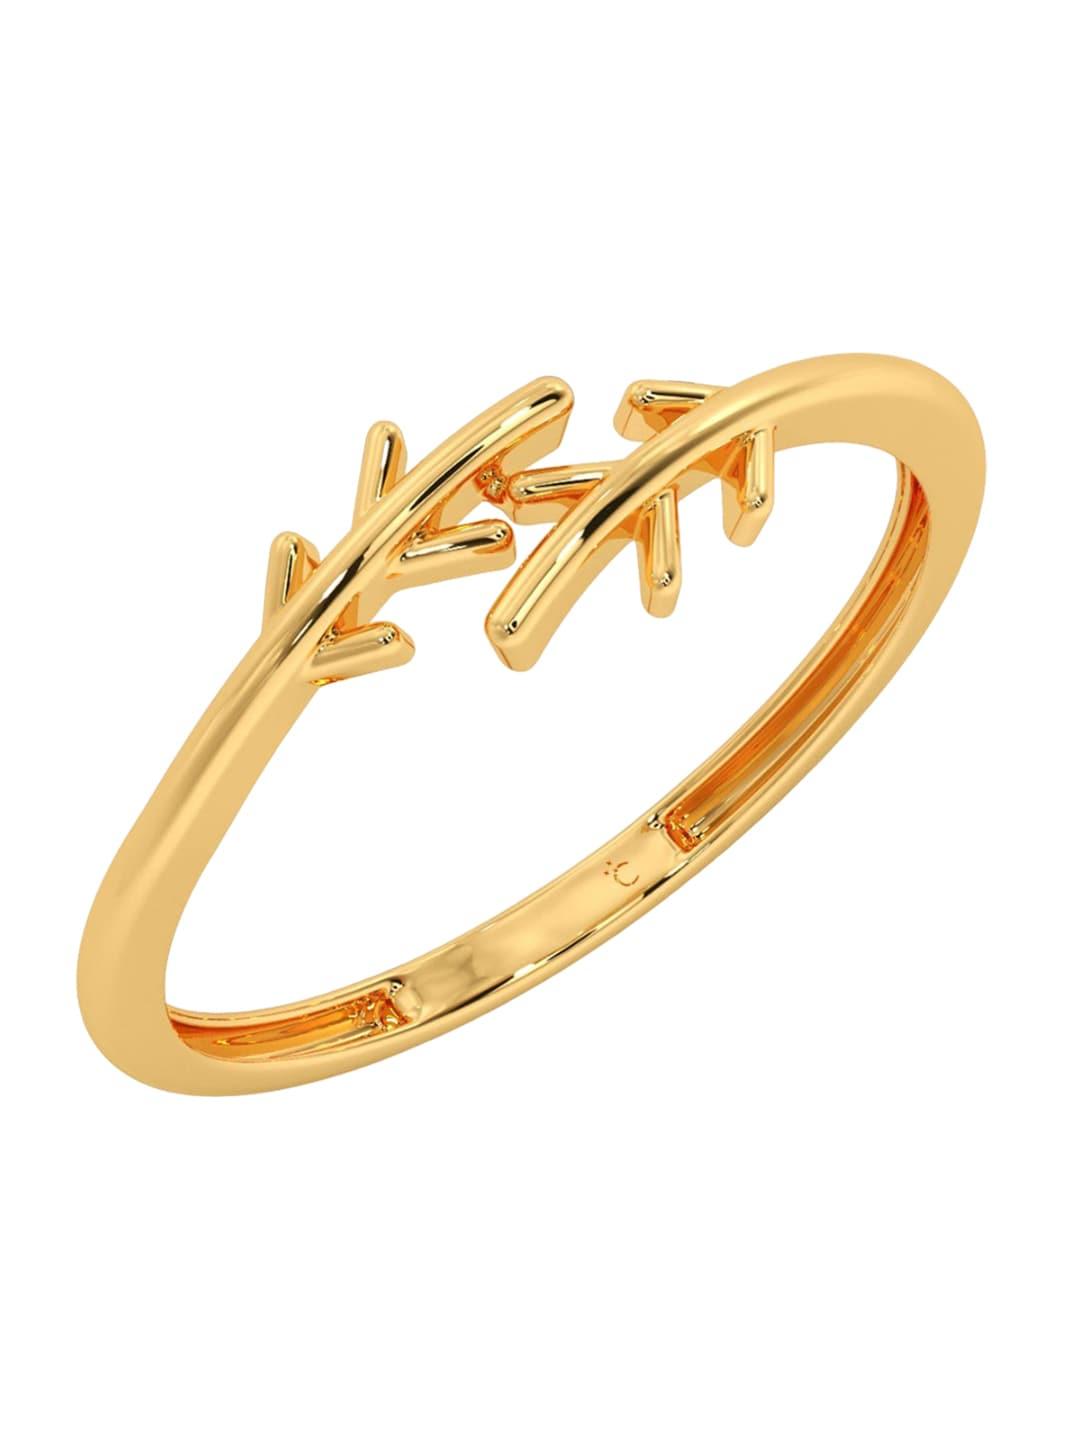 CANDERE A KALYAN JEWELLERS COMPANY 18KT Gold Ring-0.89gm